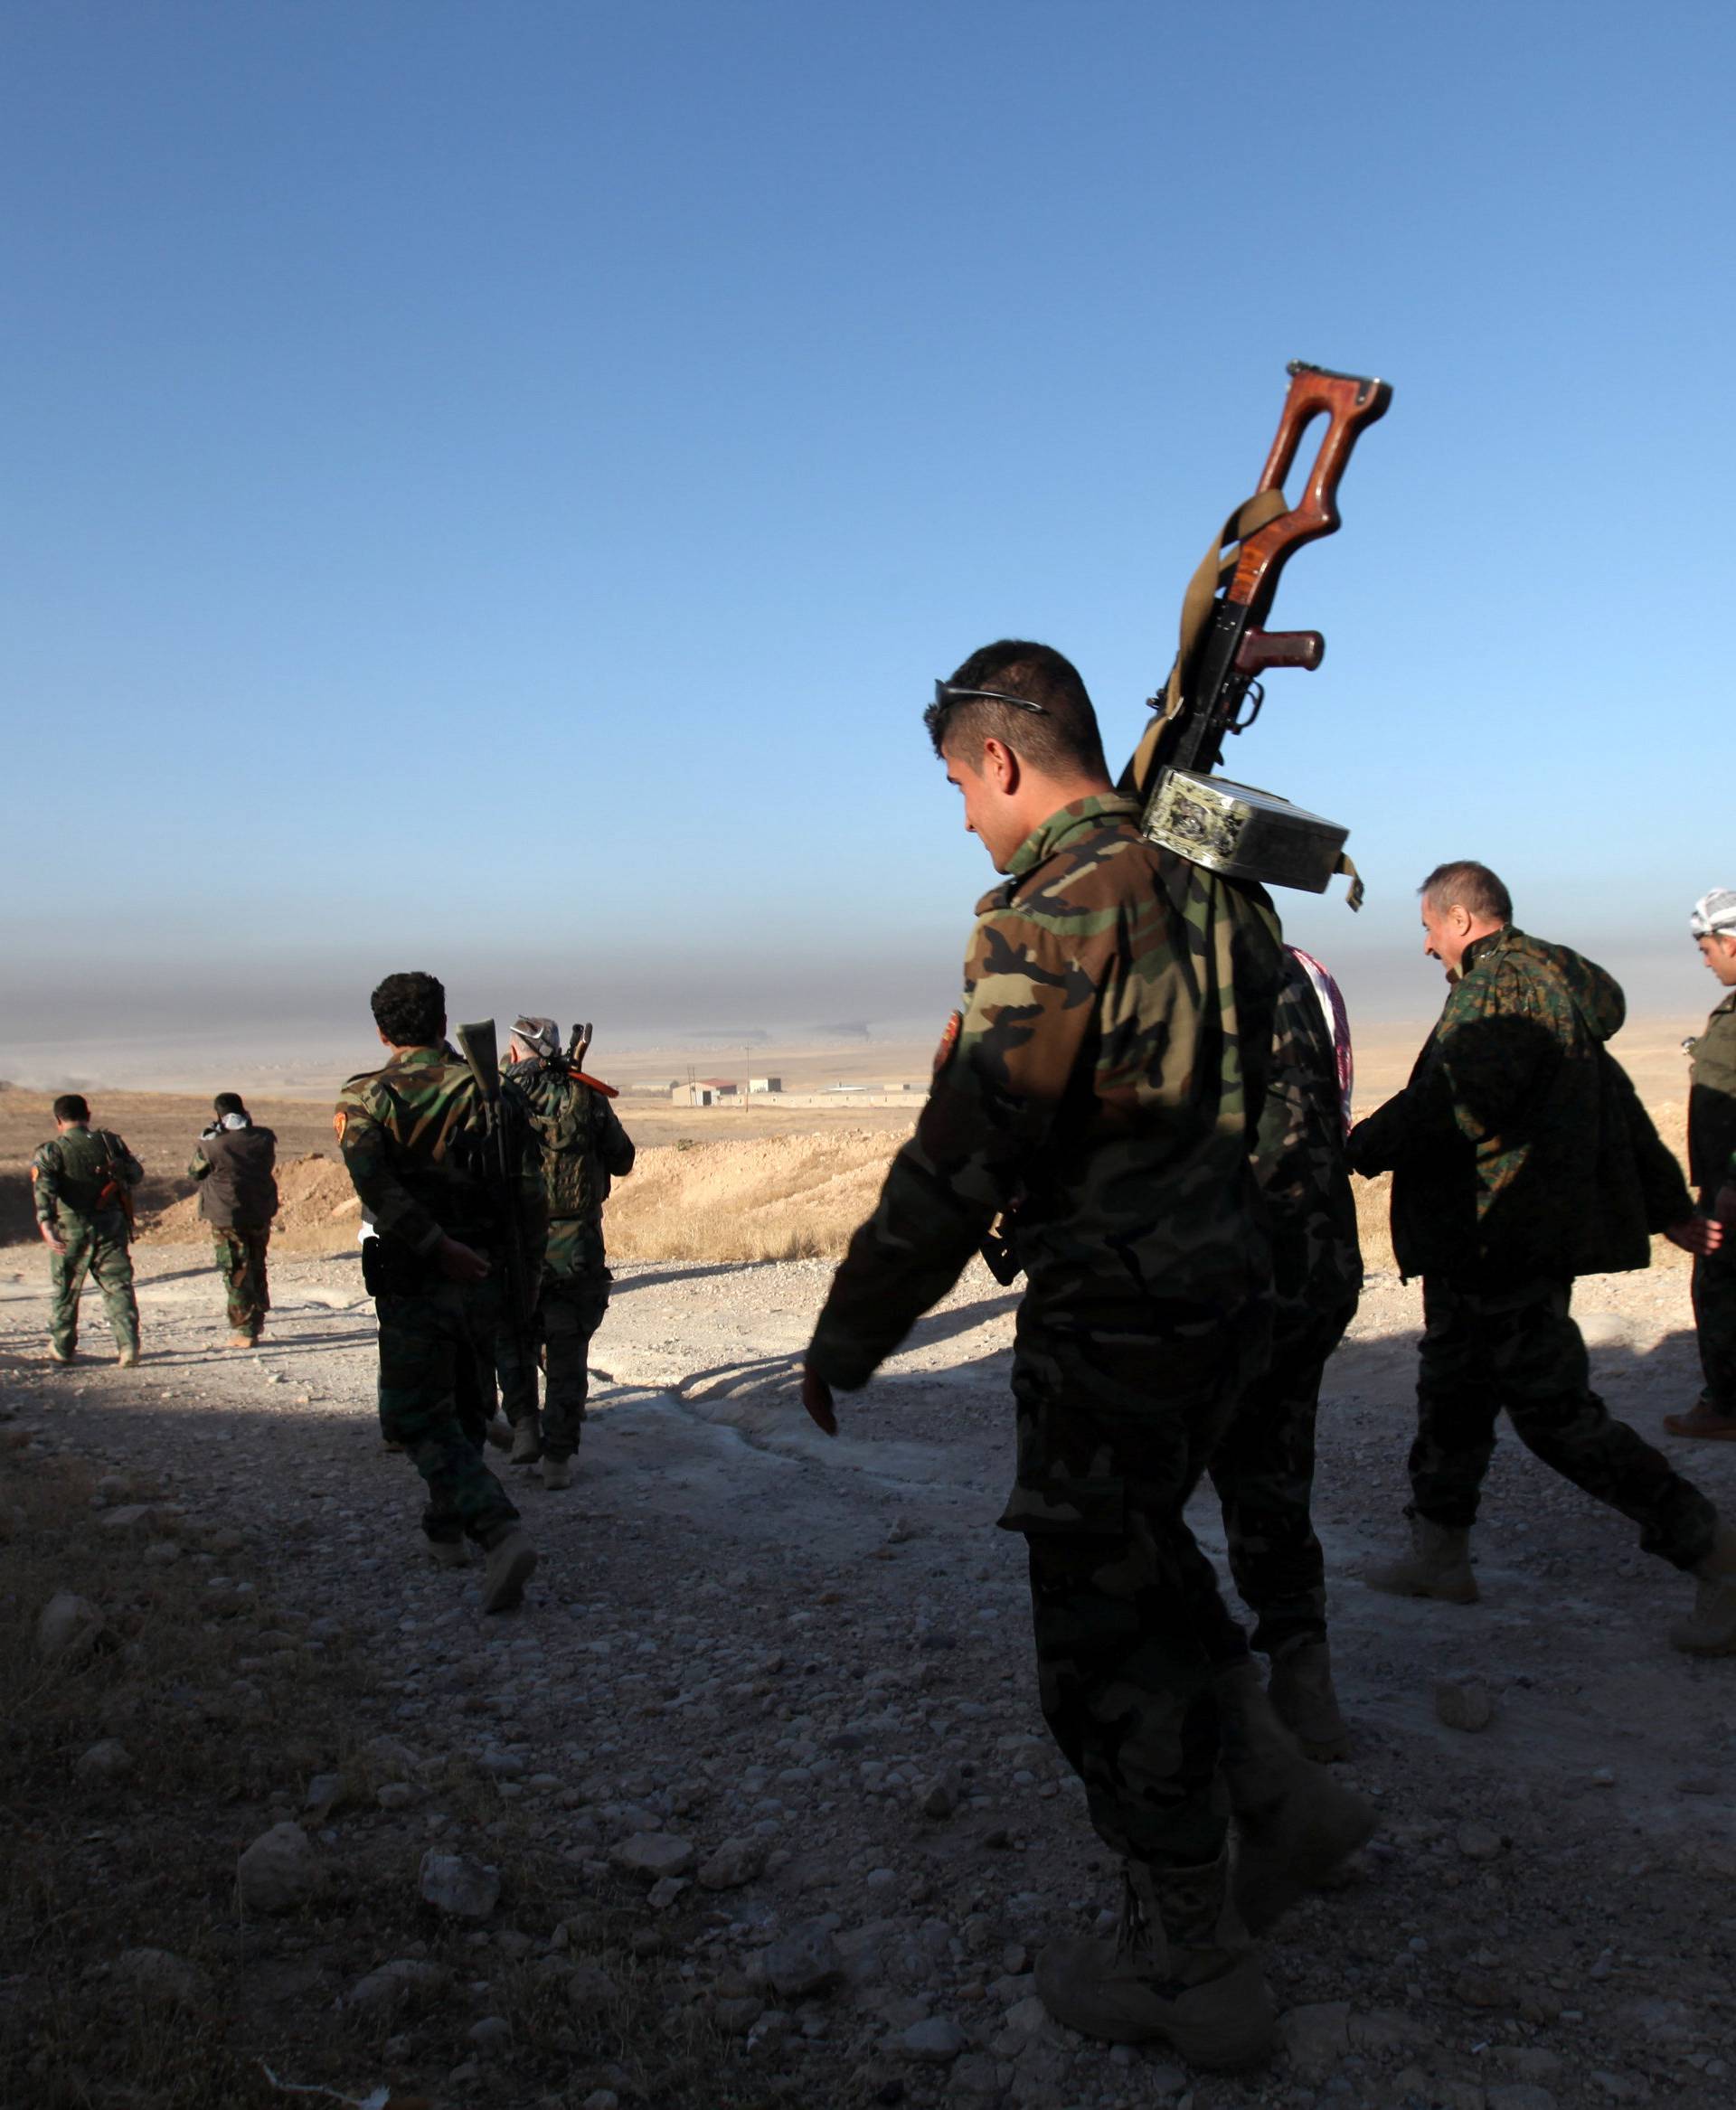 Peshmerga forces walk in the east of Mosul during operation to attack Islamic State militants in Mosul